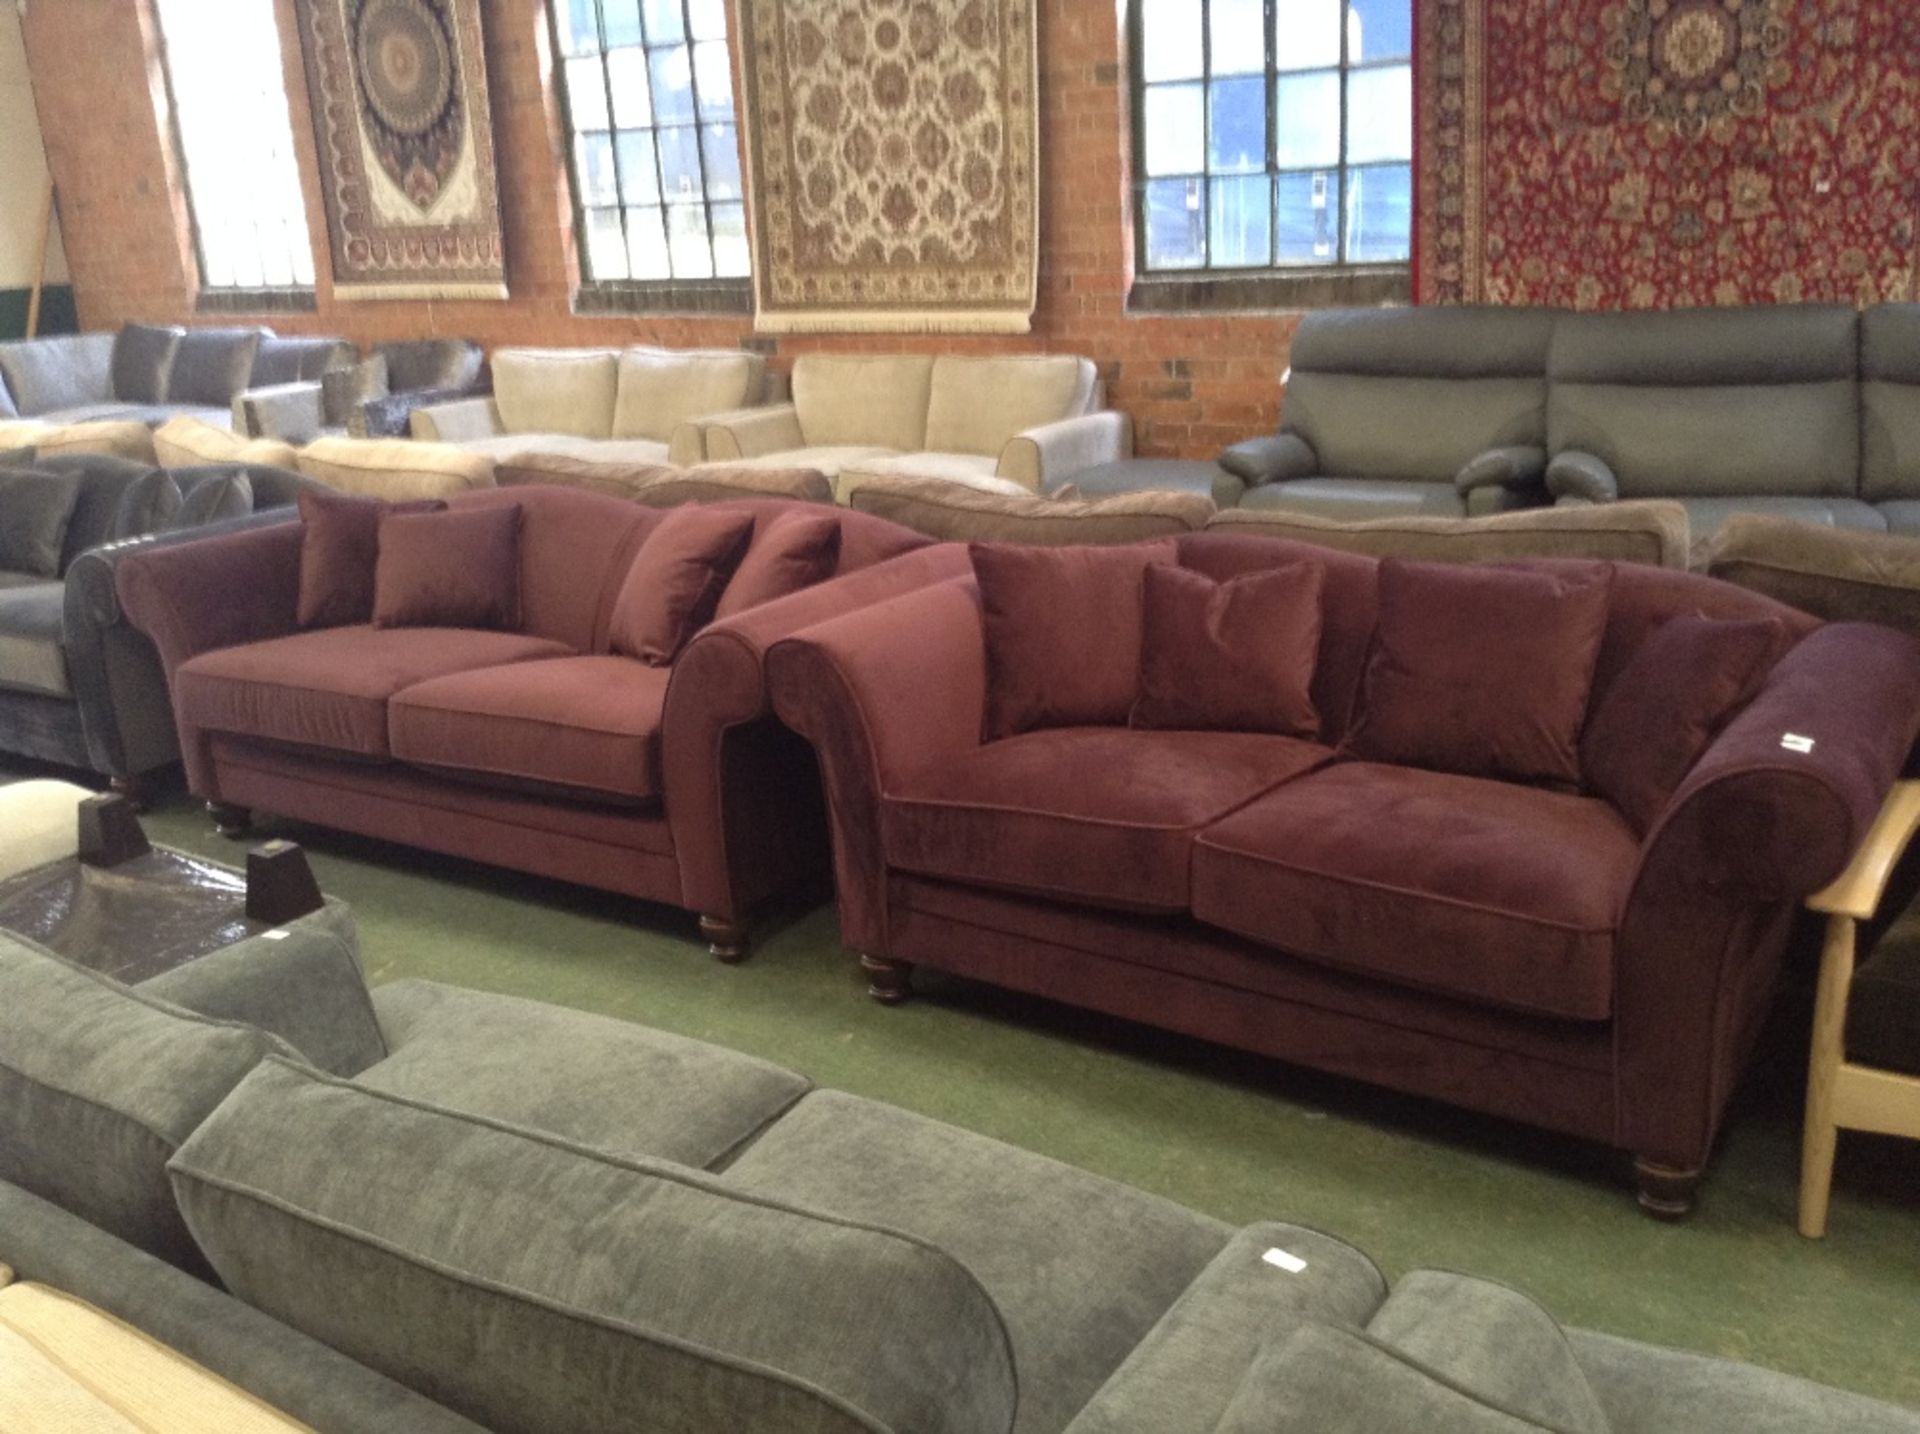 WINSLOW LUXOR GRAPE SUEDE 3 SEATER SOFA AND 2 SEAT